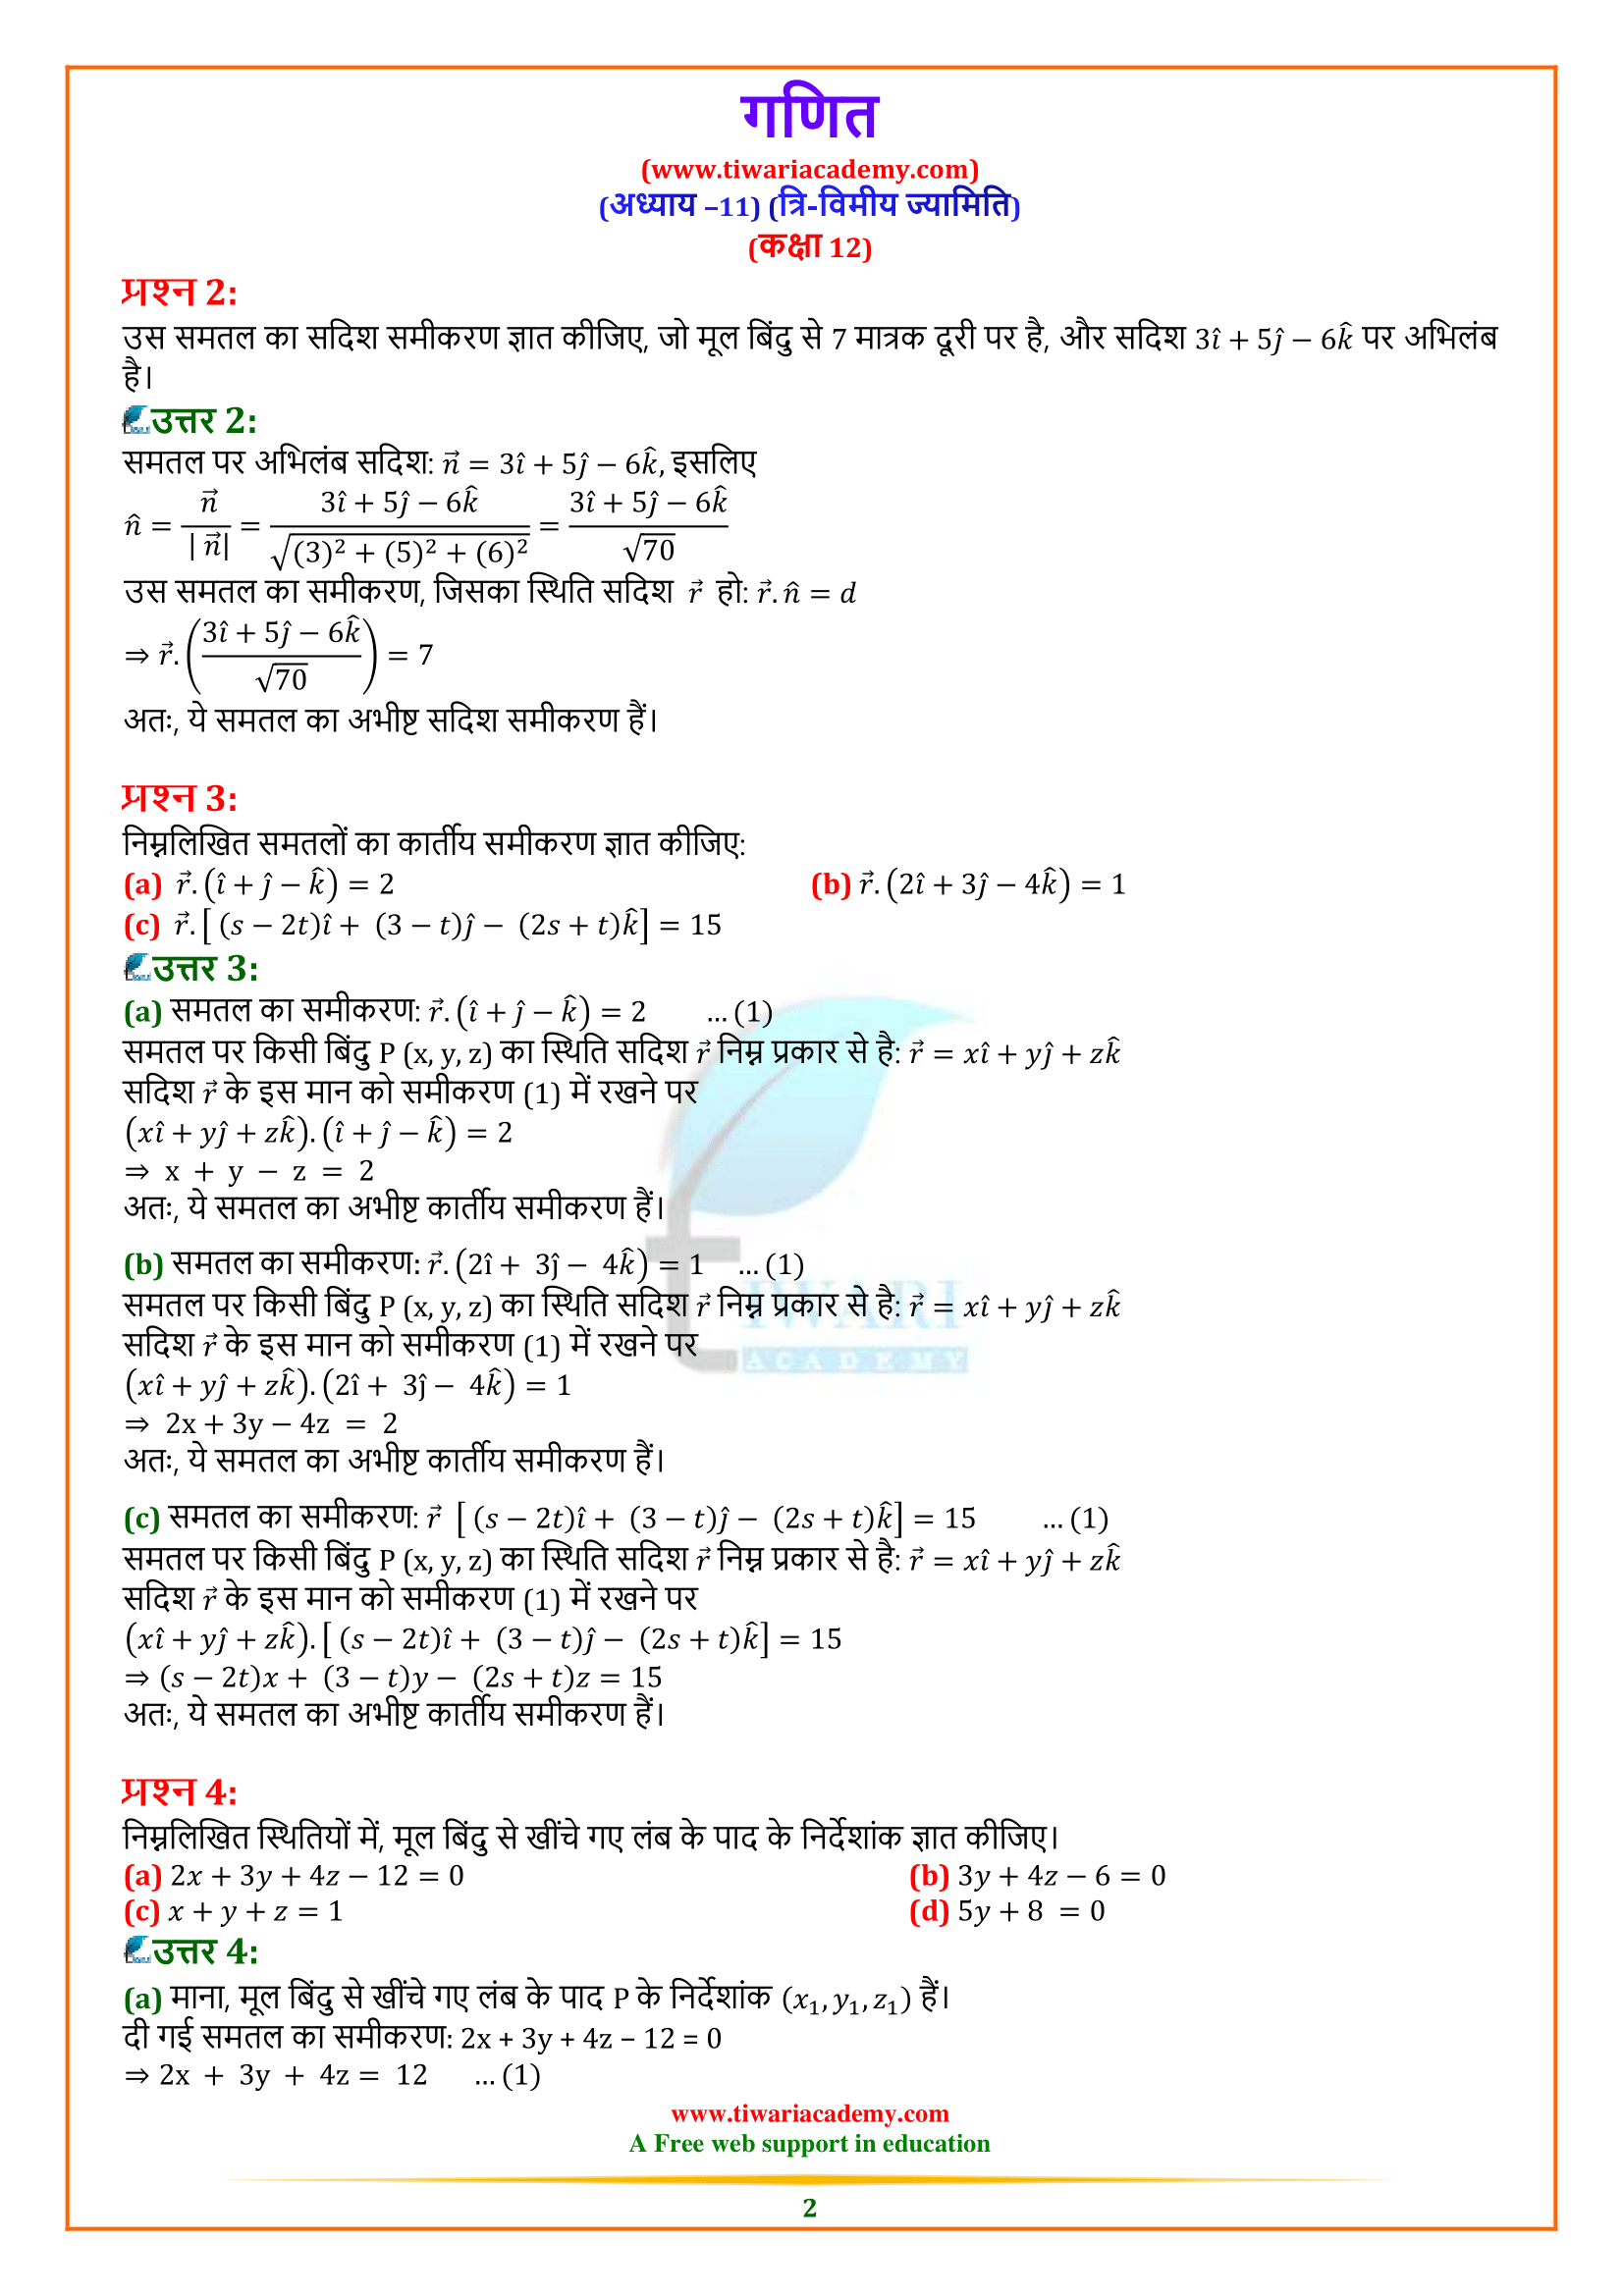 Class 12 Maths Chapter 11 Exercise 11.3 Solution in Hindi Medium for up board intermediate